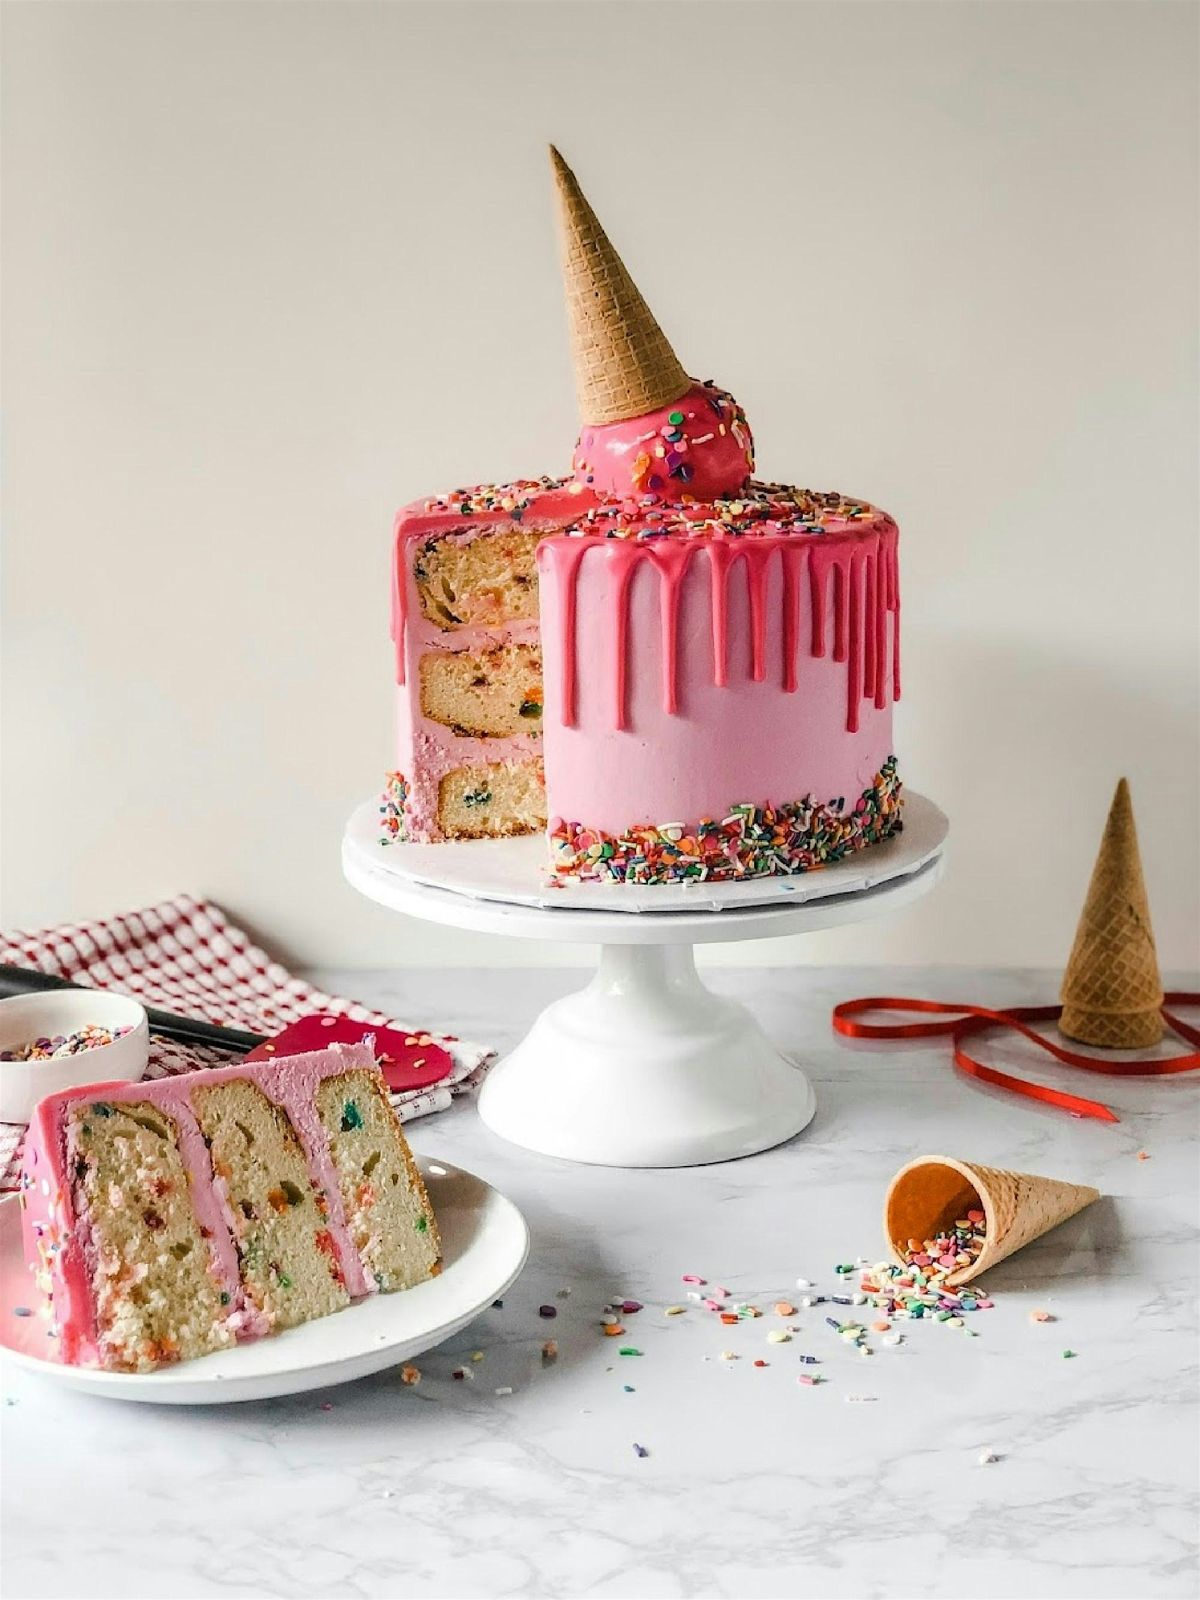 Whisk, Frost, & Decorate: A Hands-On Cake Baking and Decorating Experience